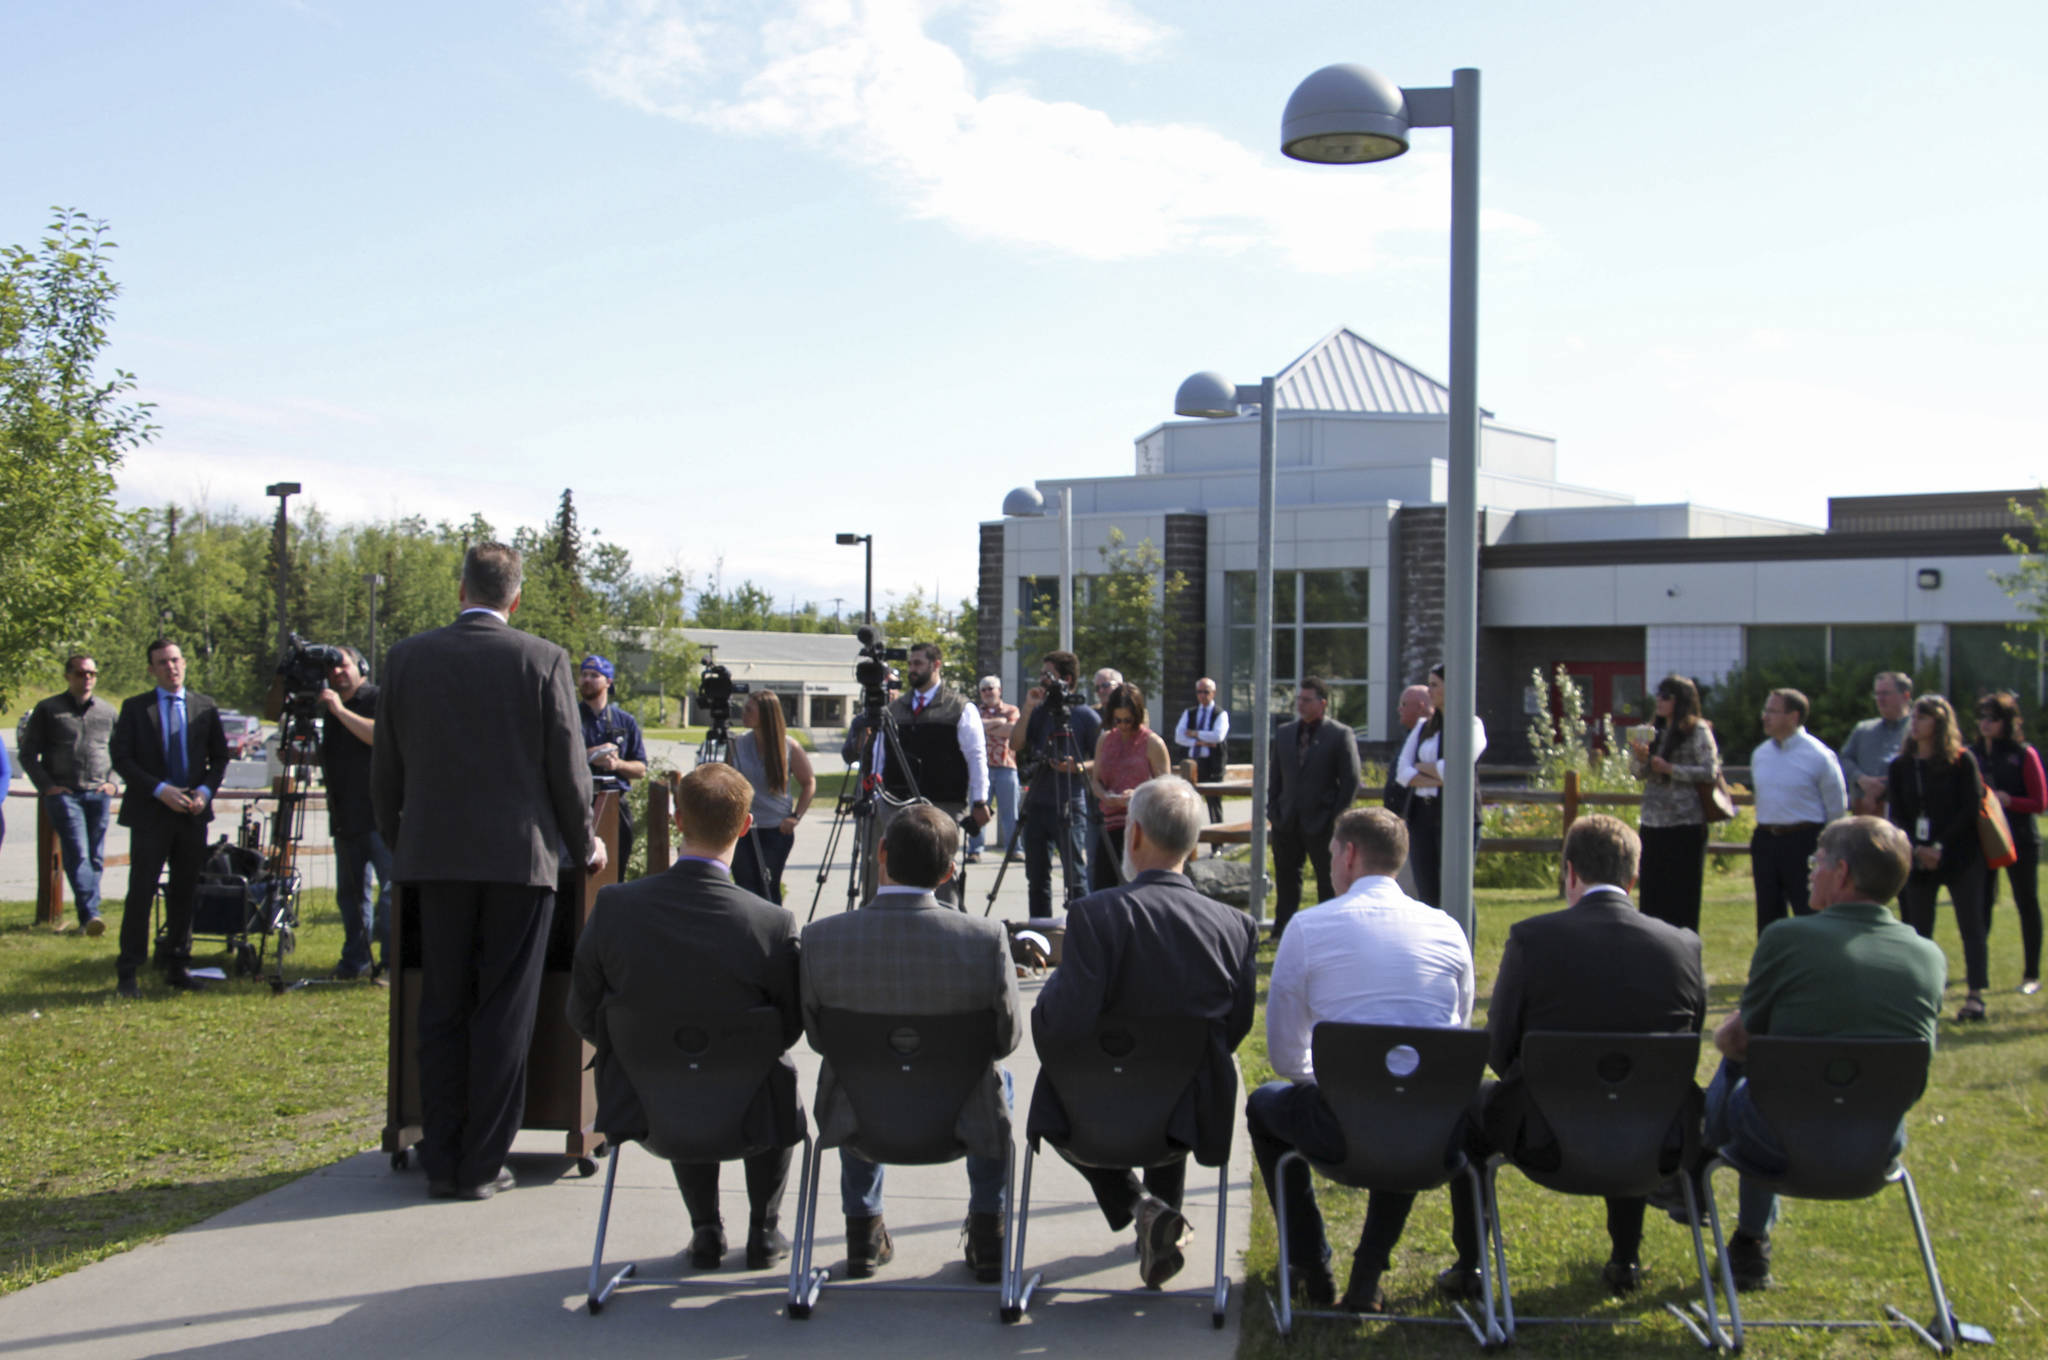 Alaska Gov. Mike Dunleavy, standing at podium, speaks at a news conference Friday, June 14, 2019, in Wasilla, Alaska. Dunleavy has called lawmakers into special session July 8 in Wasilla, and his administration gave a tour of the recommended site at Wasilla Middle School to reporters. (AP Photo/Mark Thiessen)